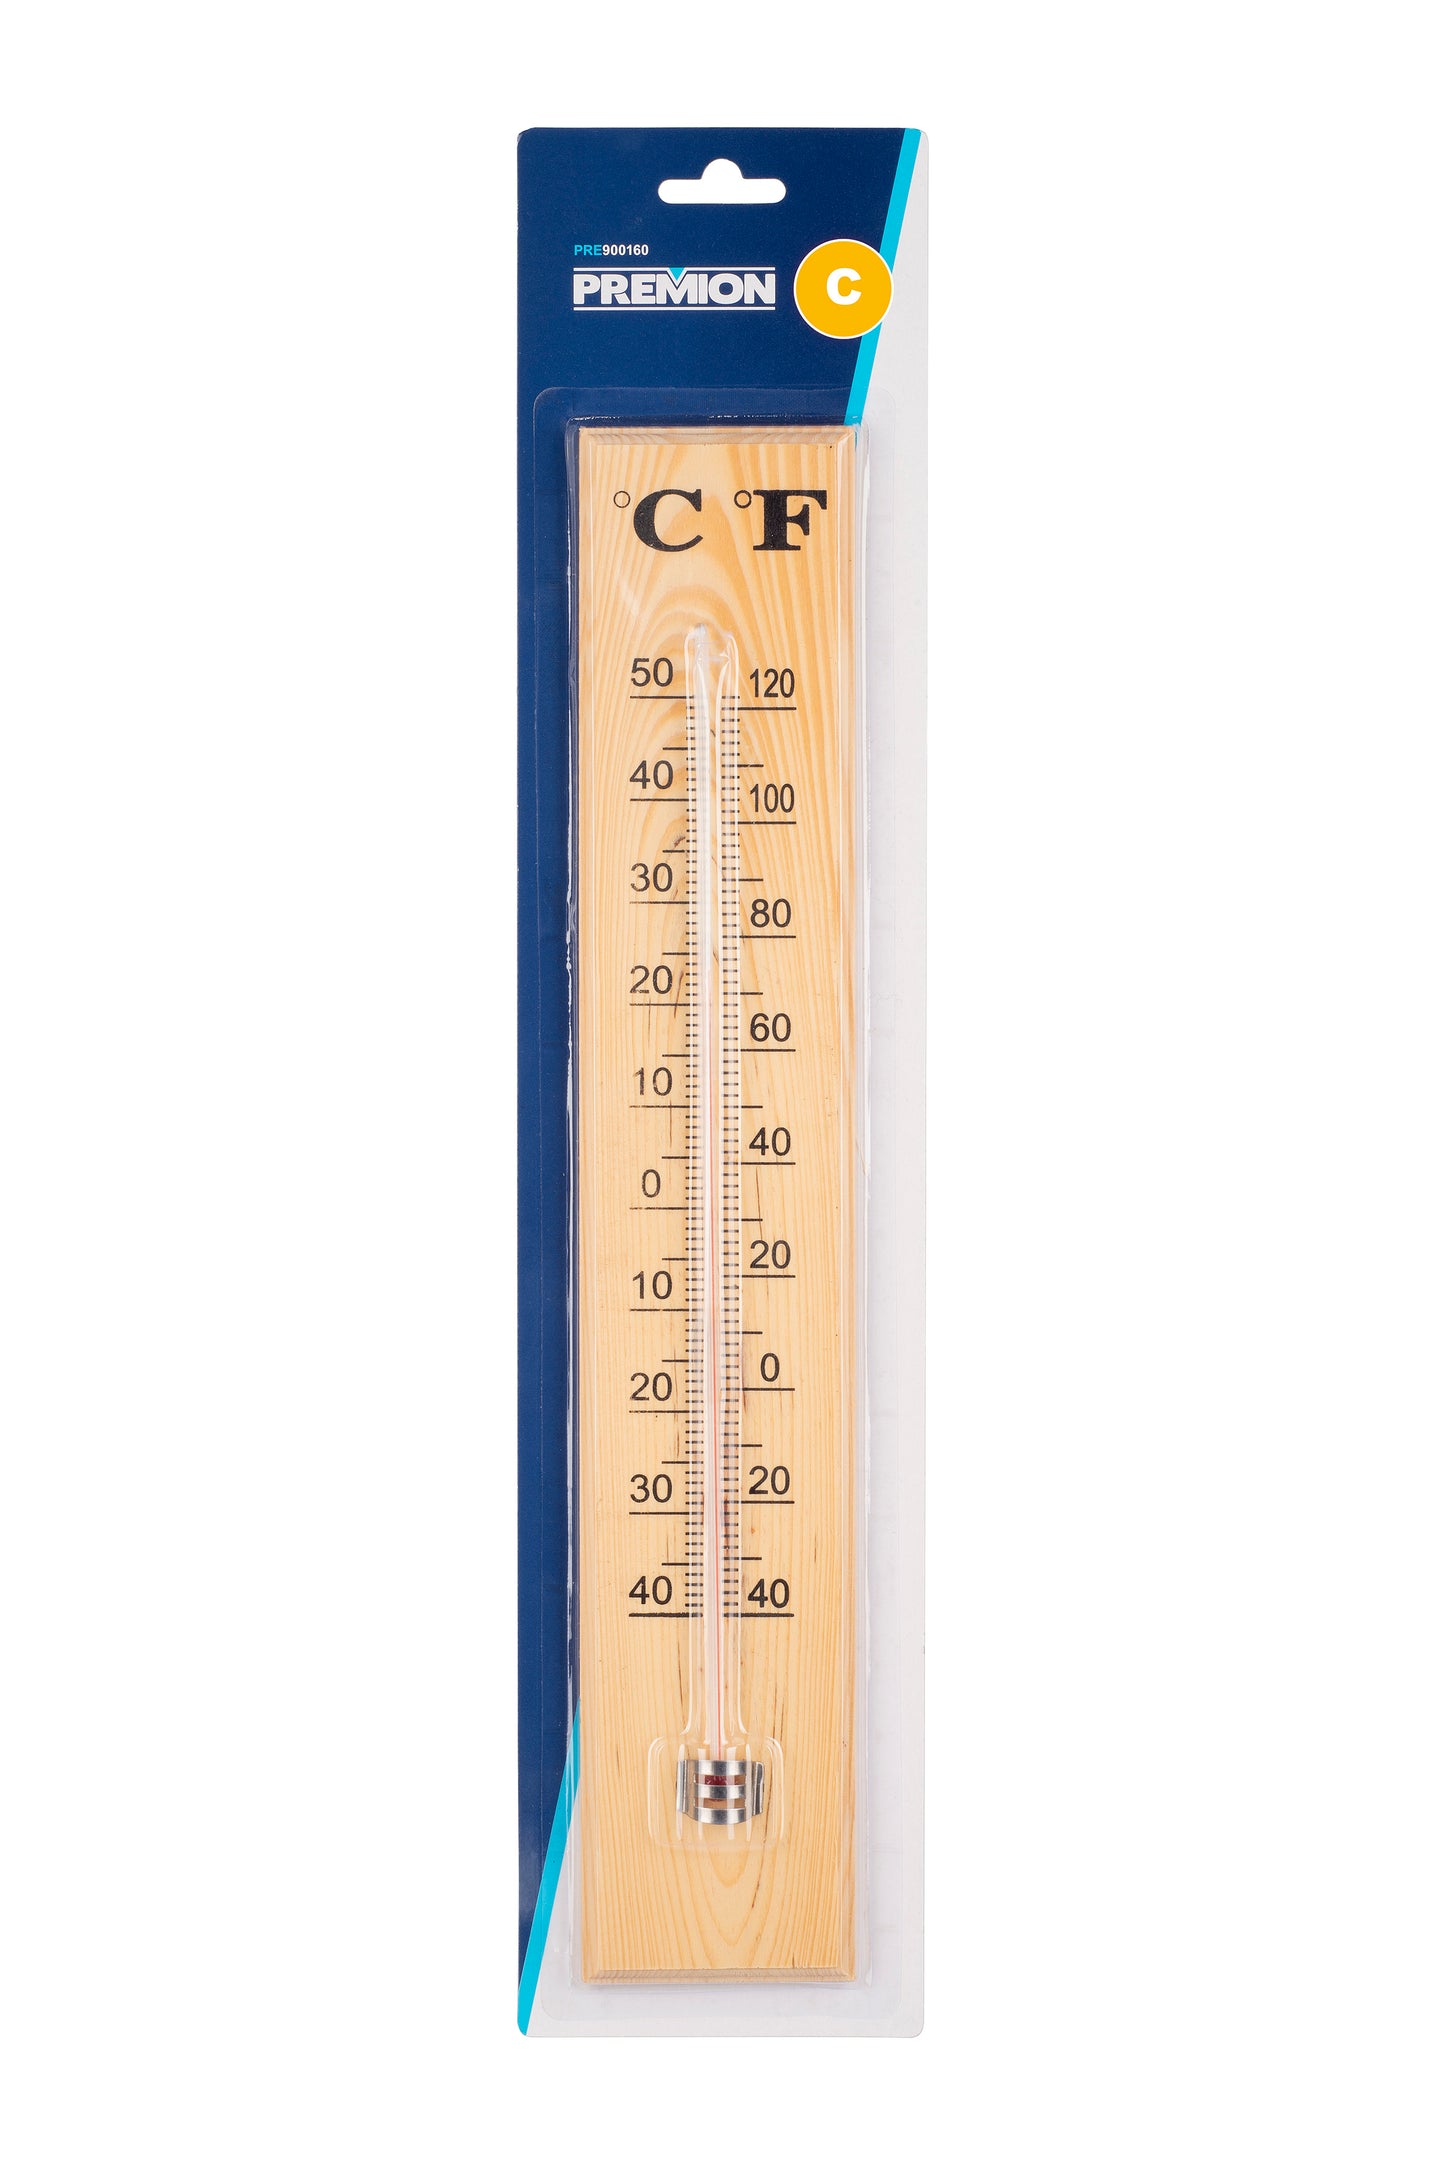 Premion - Outdoor Thermometer - Wood